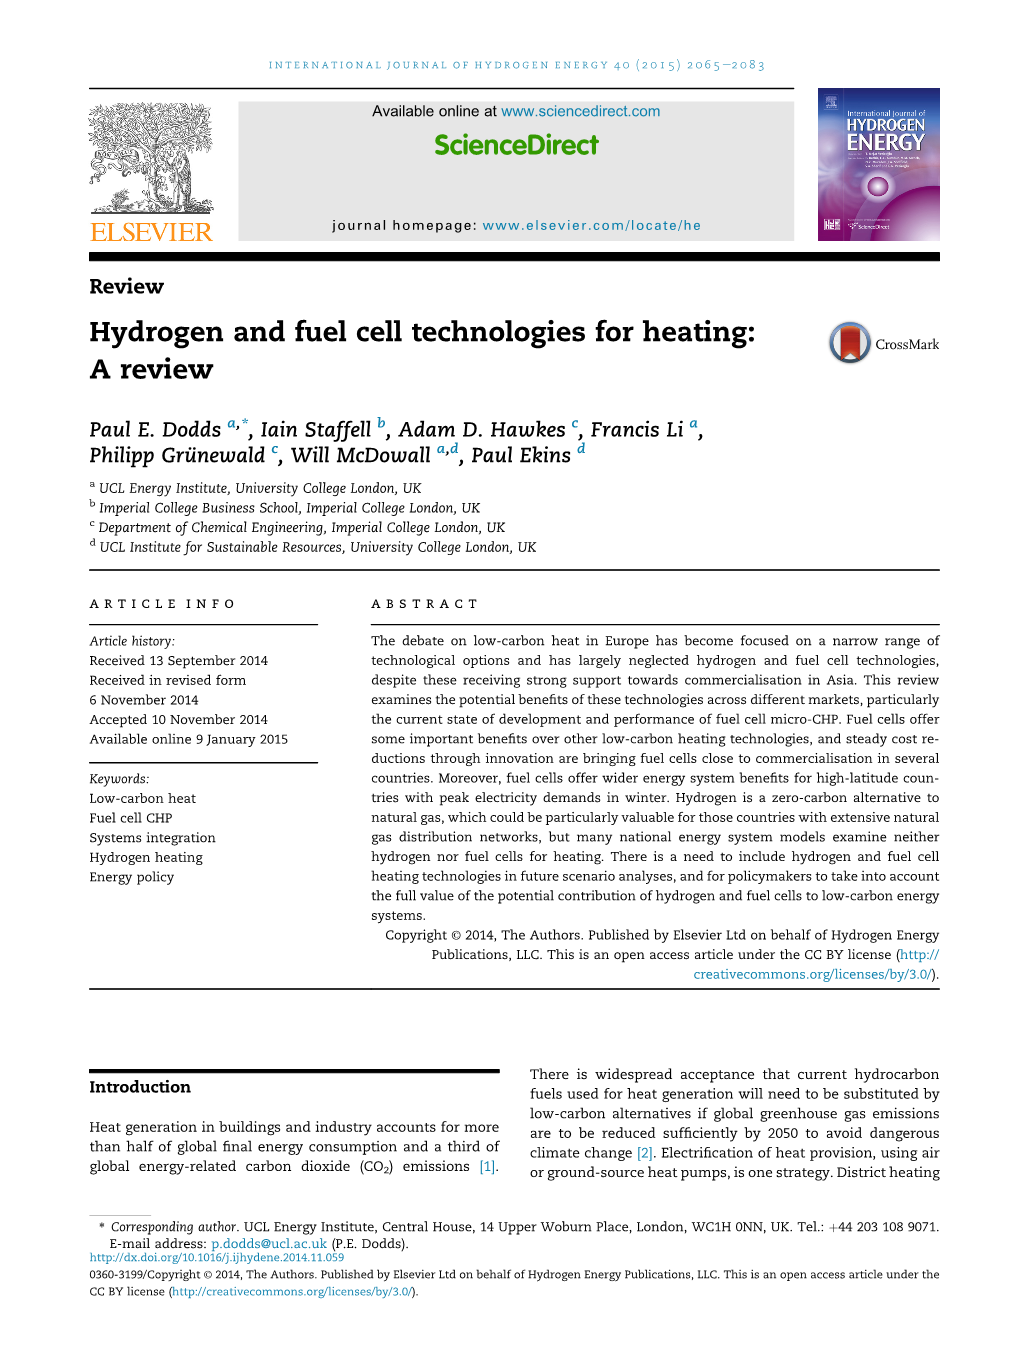 Hydrogen and Fuel Cell Technologies for Heating: a Review